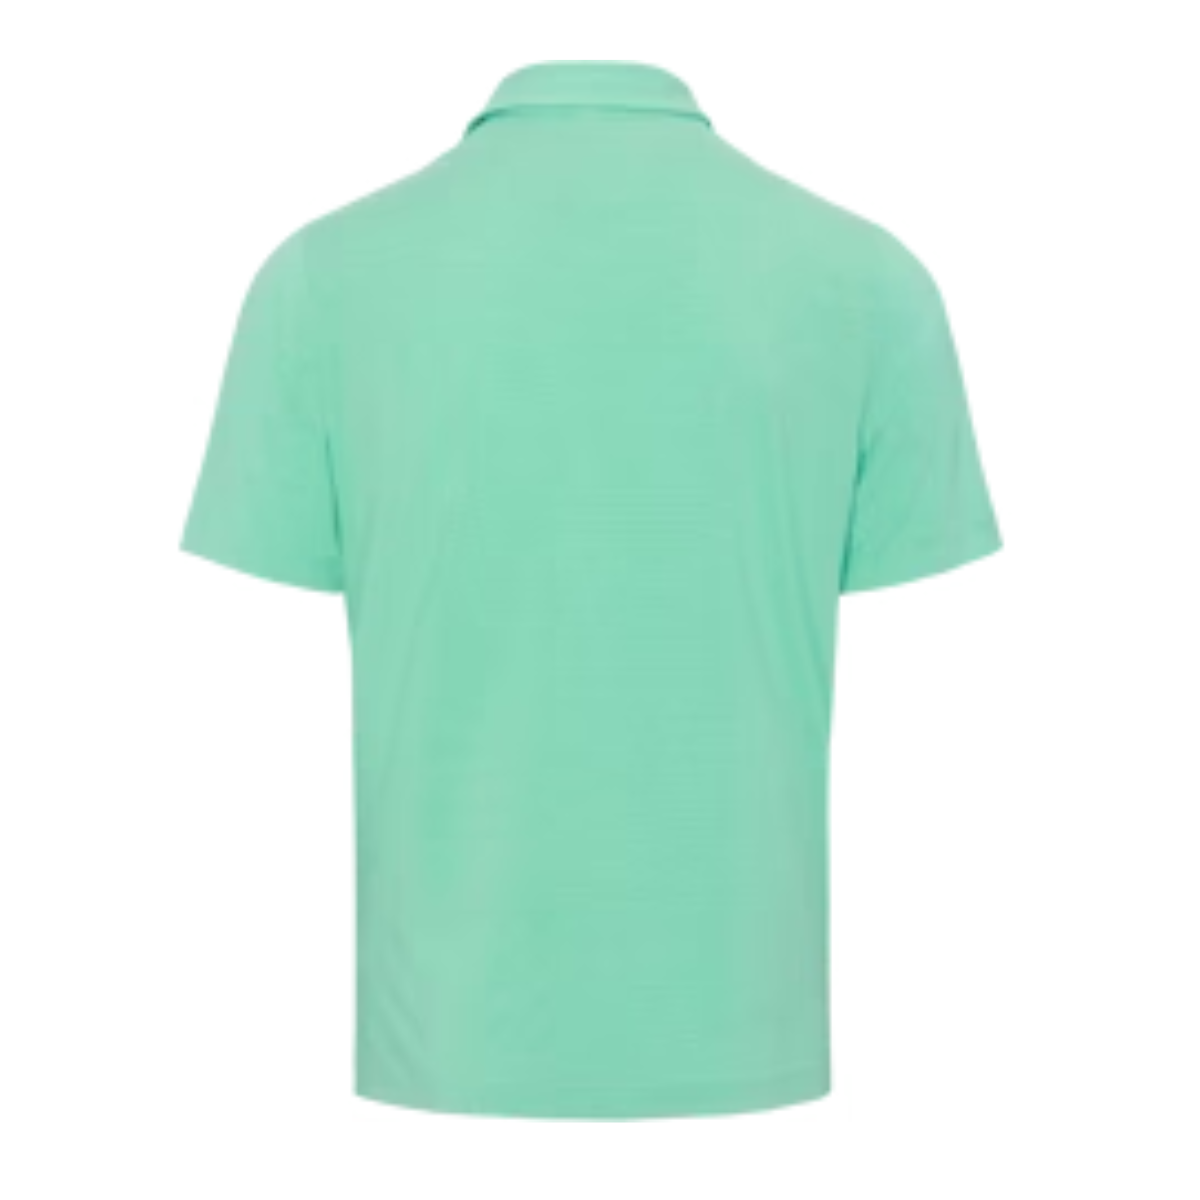 Greg Norman Men's Engineered Wave Stripes Polo T-Shirt (US Size)